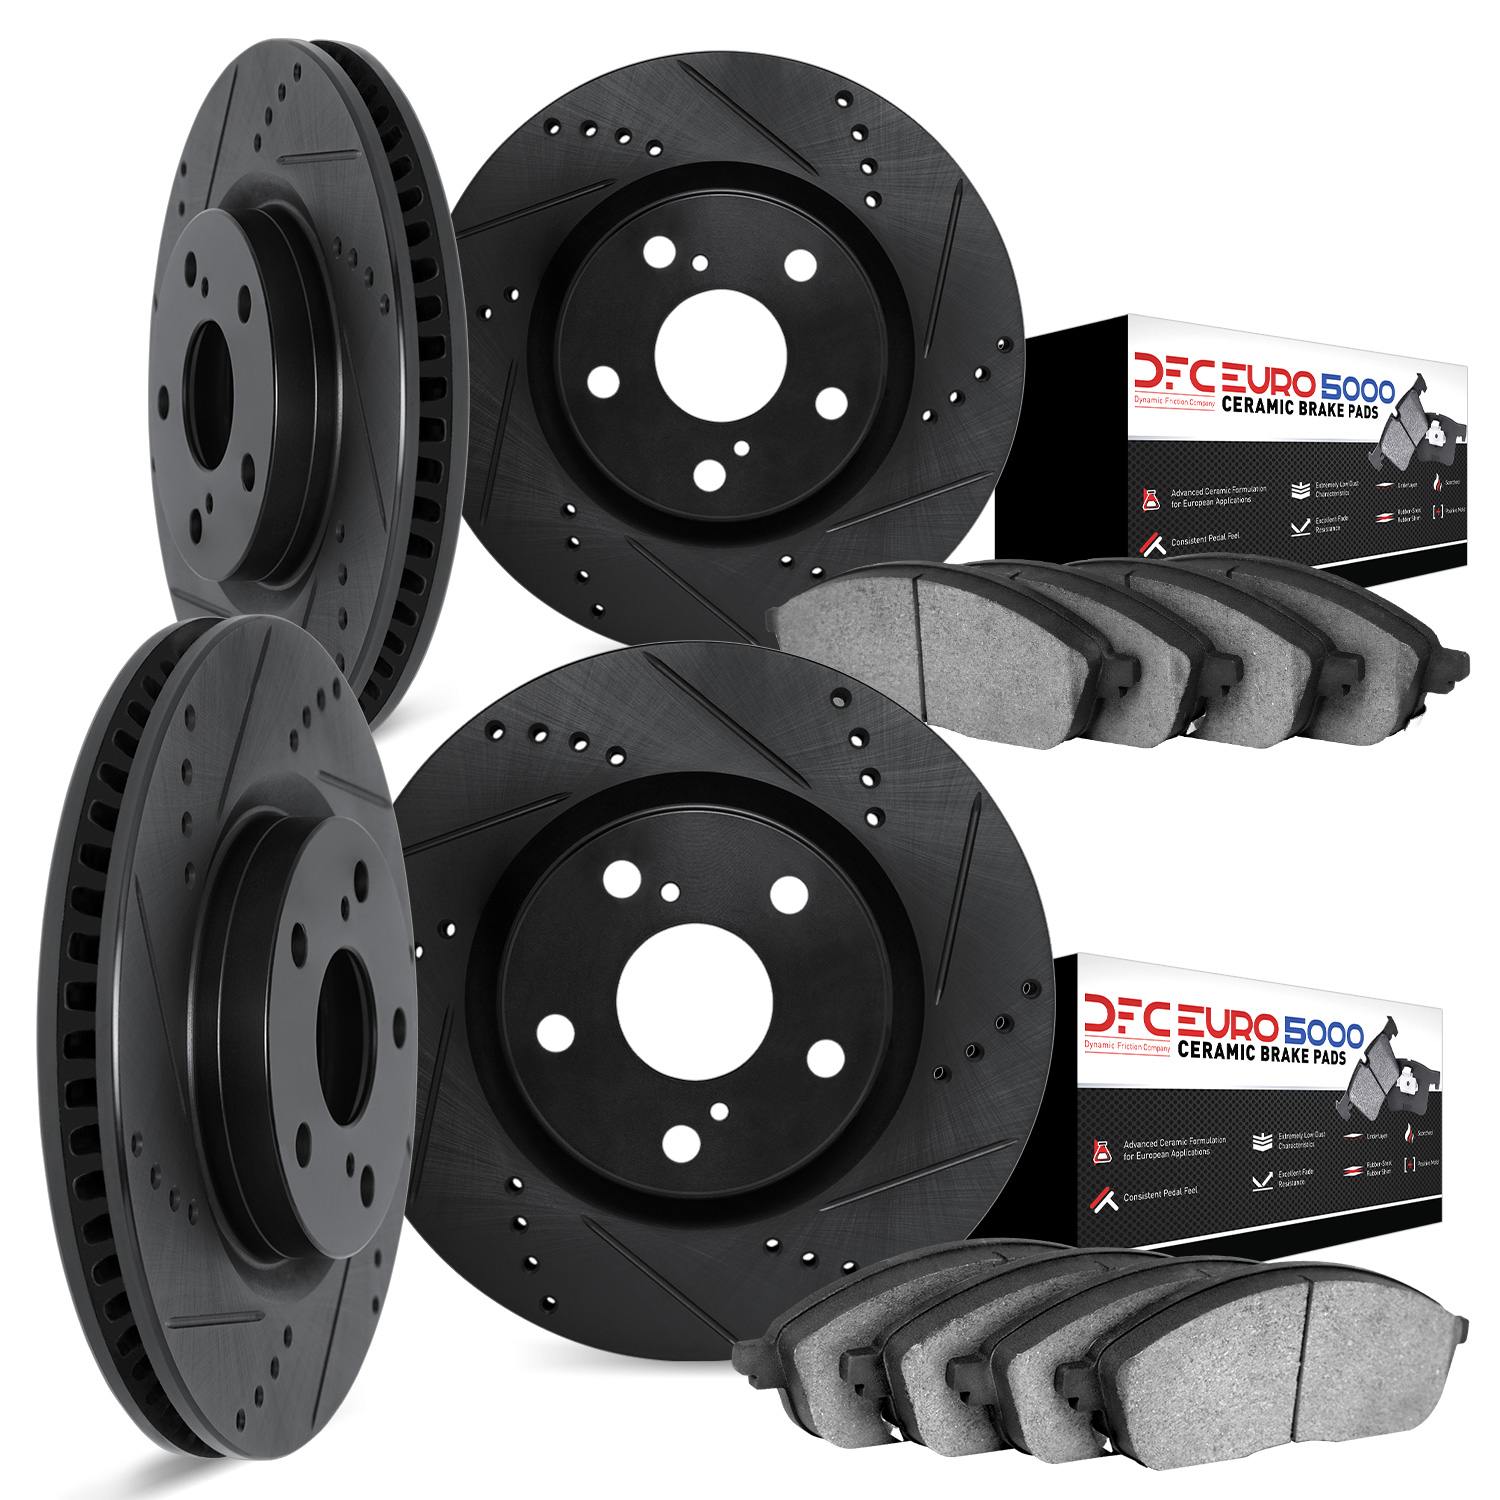 8604-31024 Drilled/Slotted Brake Rotors w/5000 Euro Ceramic Brake Pads Kit [Black], 2012-2021 BMW, Position: Front and Rear